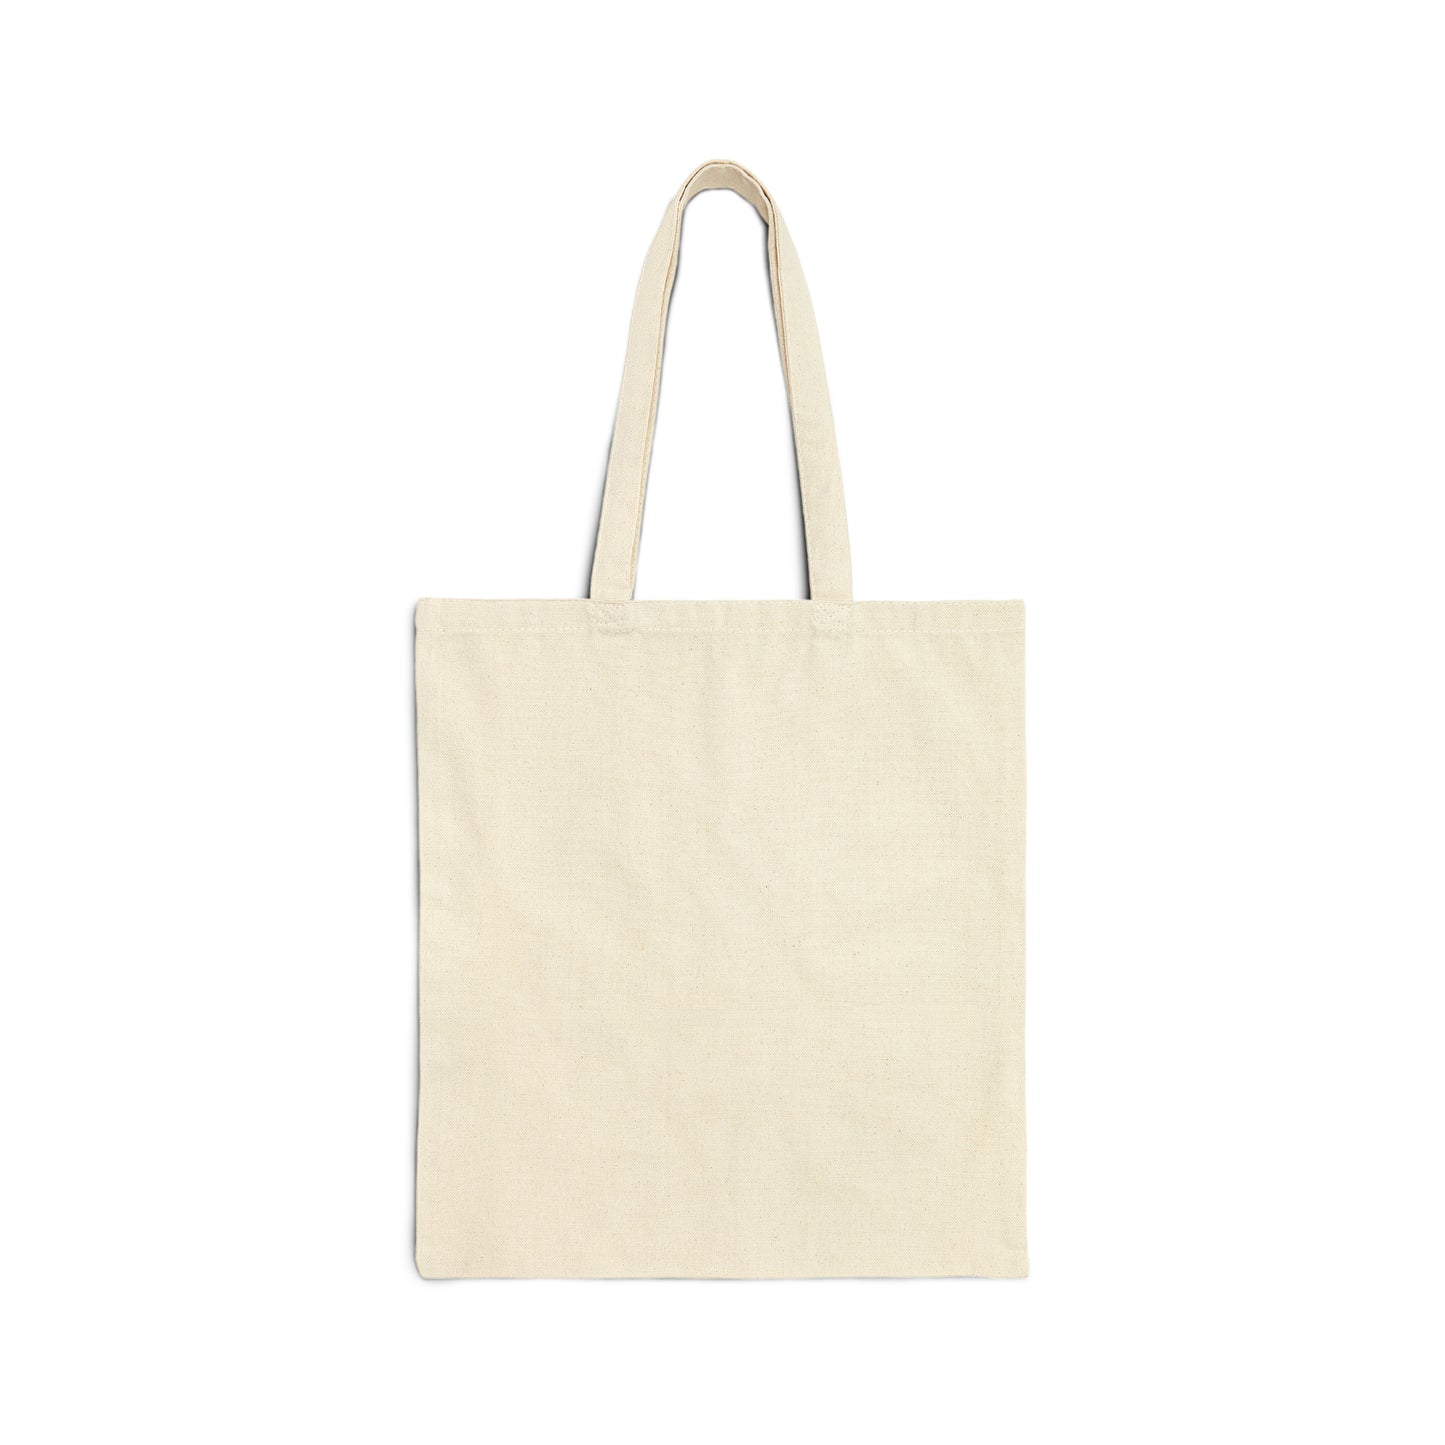 Weekends. Coffee. & Sports -  Beige Cotton Canvas Tote Bag